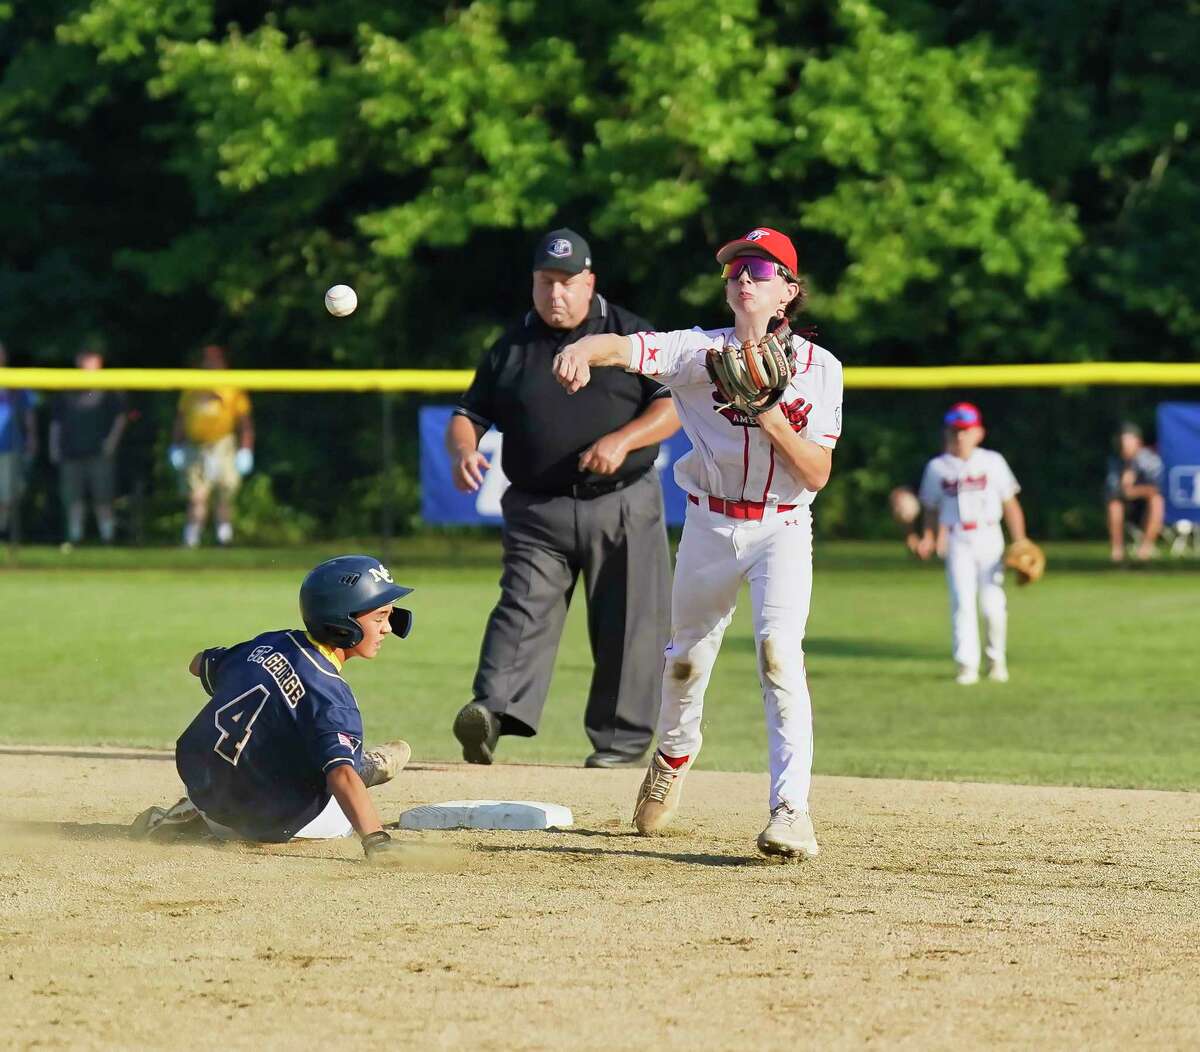 Fairfield American lost 7-5 to New York on Monday in a Metro Regional Little League Baseball game at Breen Field in Bristol.